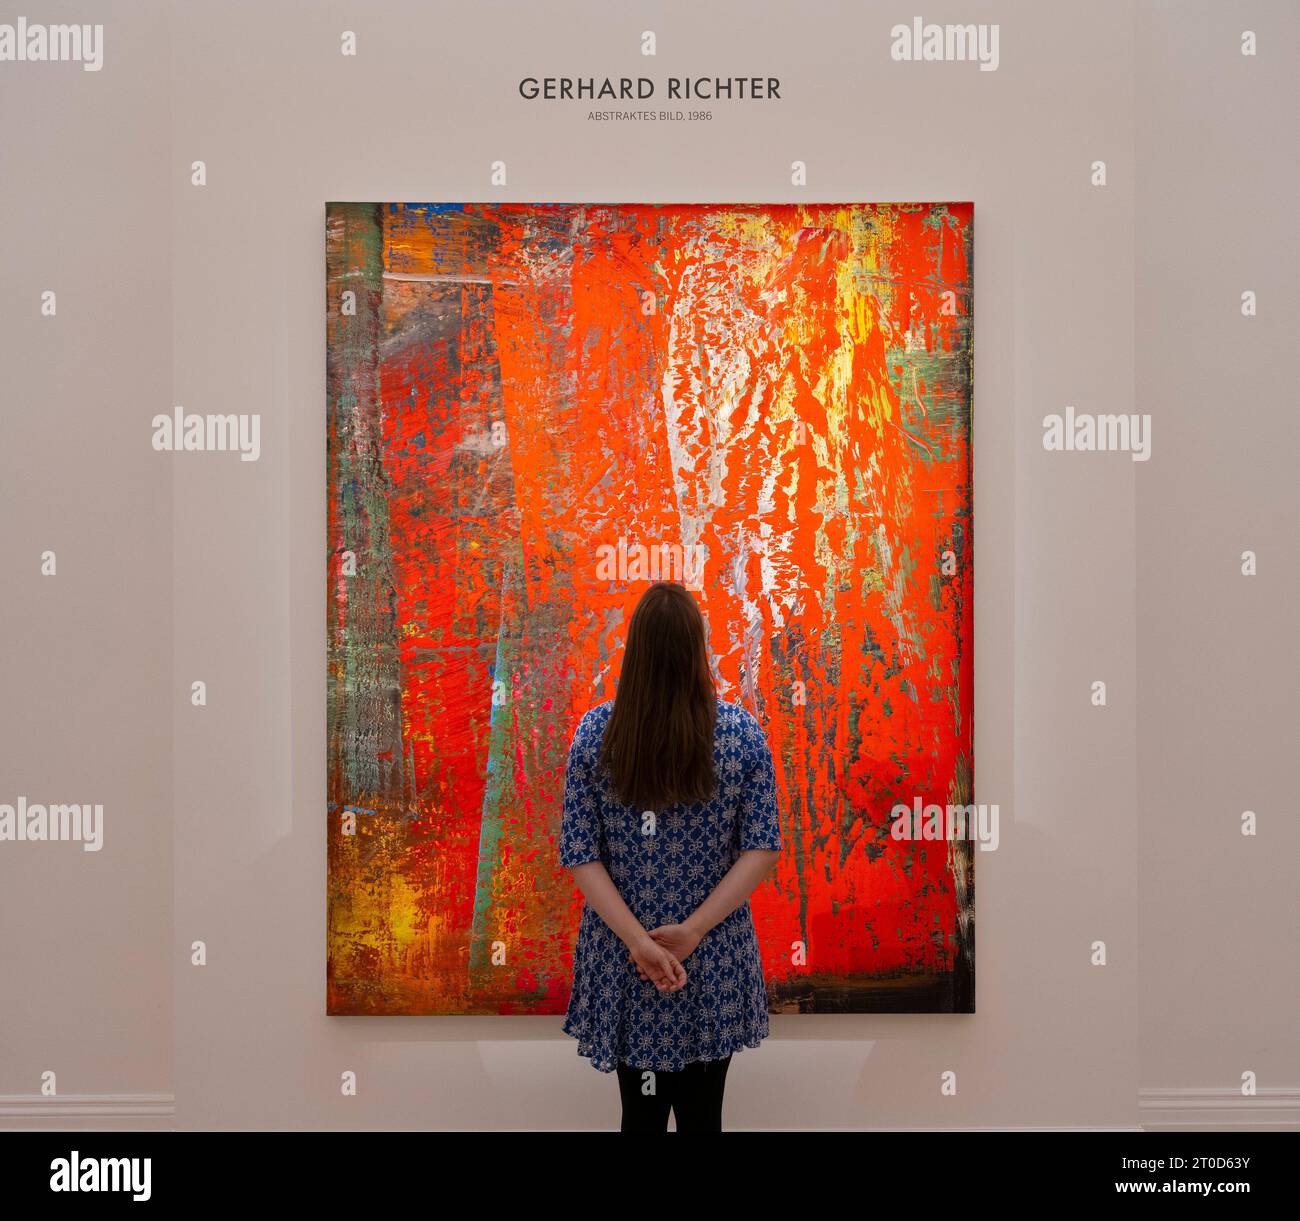 Sotheby's, London, UK. 6th Oct, 2023. Highlights from Sotheby's London Contemporary Frieze Art sales & The Fisher Landau Collection are on view Contemporary Evening Auction works include: Gerhard Richter, Abstraktes Bild, estimate £16,000,000 - 24,000,000. Credit: Malcolm Park/Alamy Live News Stock Photo